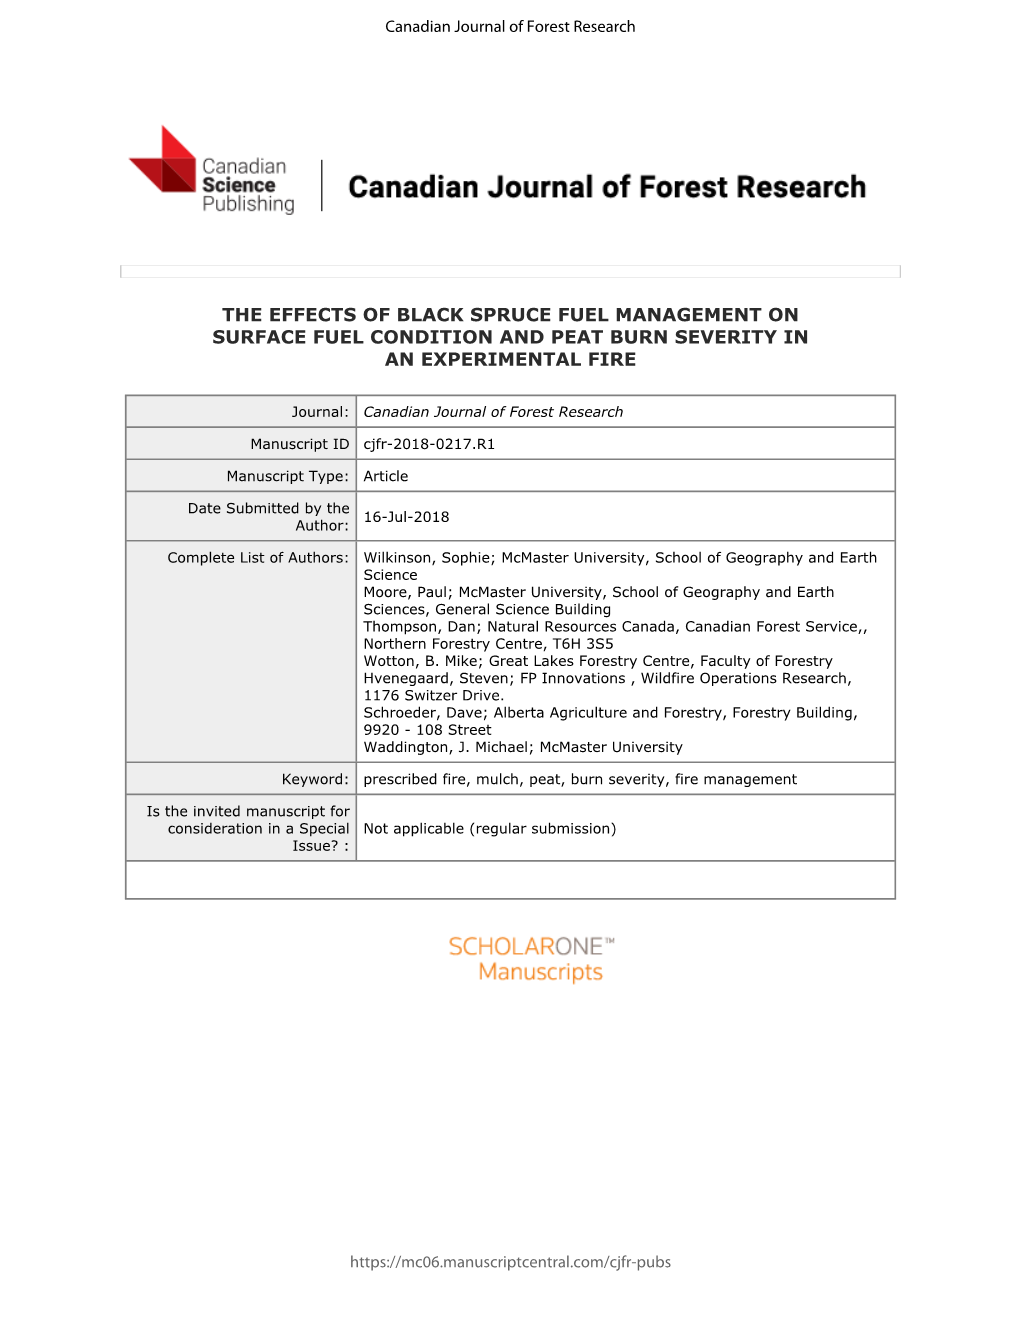 The Effects of Black Spruce Fuel Management on Surface Fuel Condition and Peat Burn Severity in an Experimental Fire